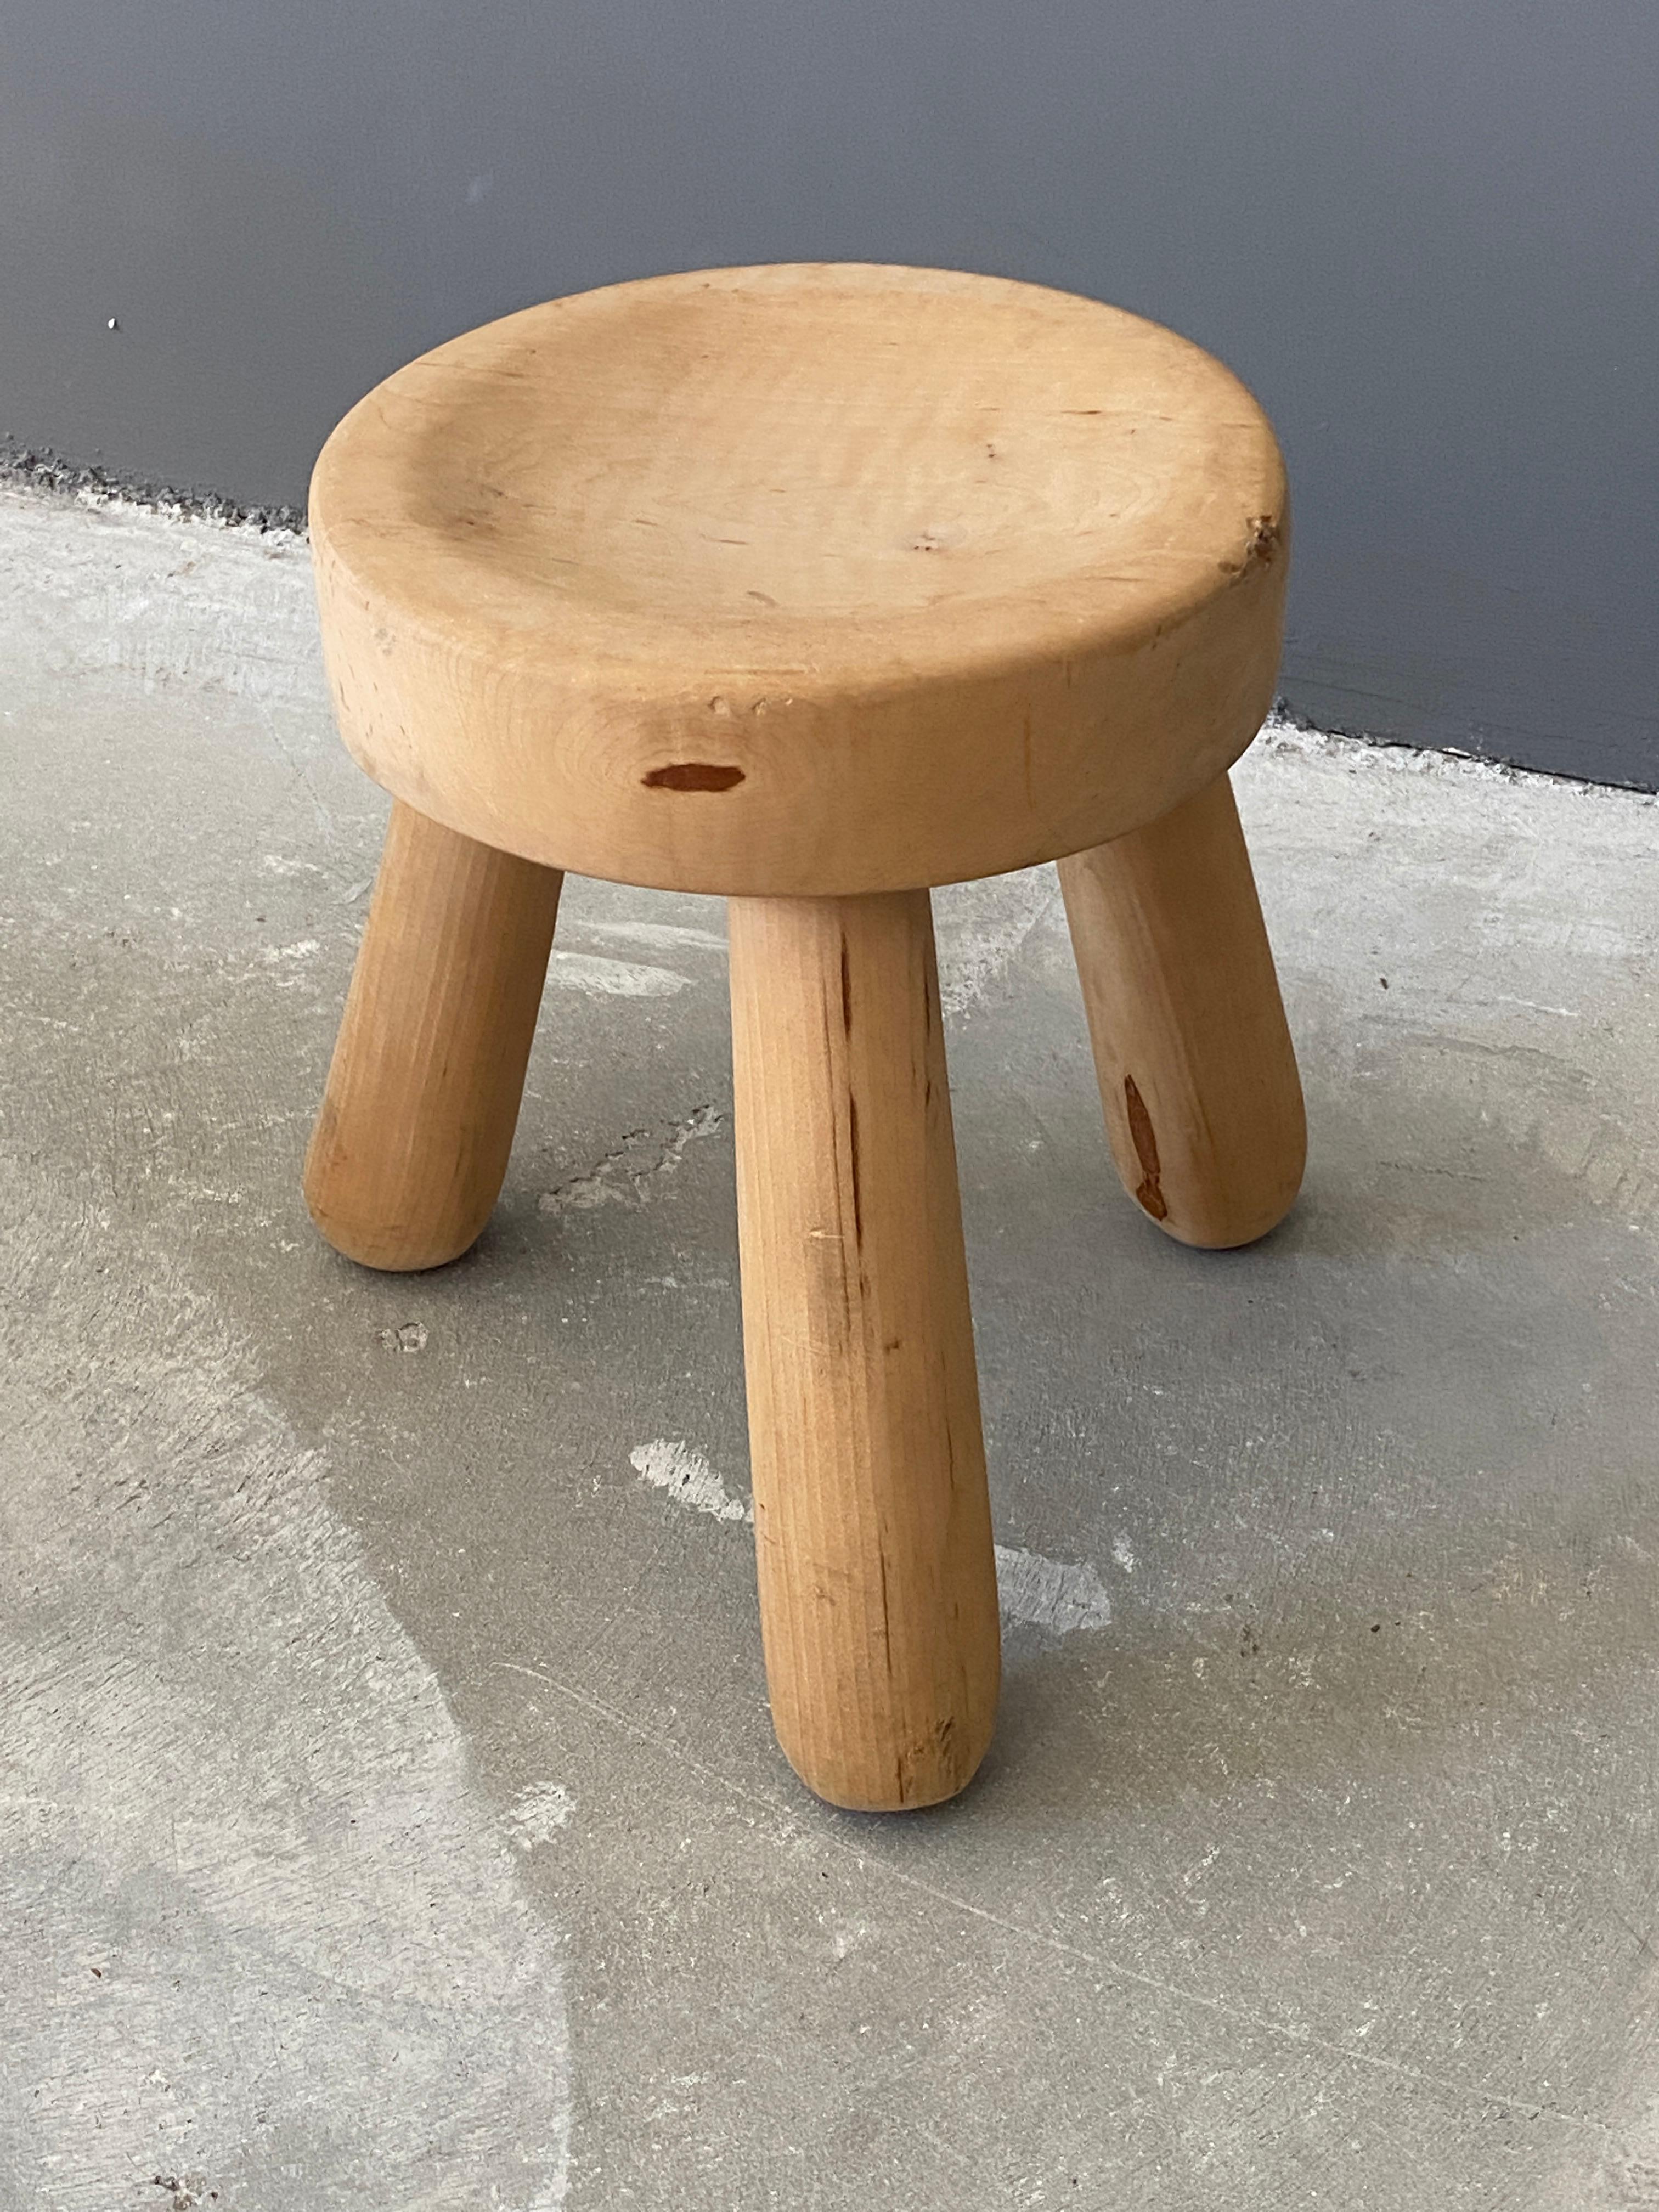 A sculptural stool, attributed to Ingvar Hildingsson, Kalmar Läns Slöjdare IH Slöjd Rugstorp. In lightly treated pine. 

Other designers of the period include Charlotte Perriand, Pierre Chapo, and Axel Einar Hjorth.